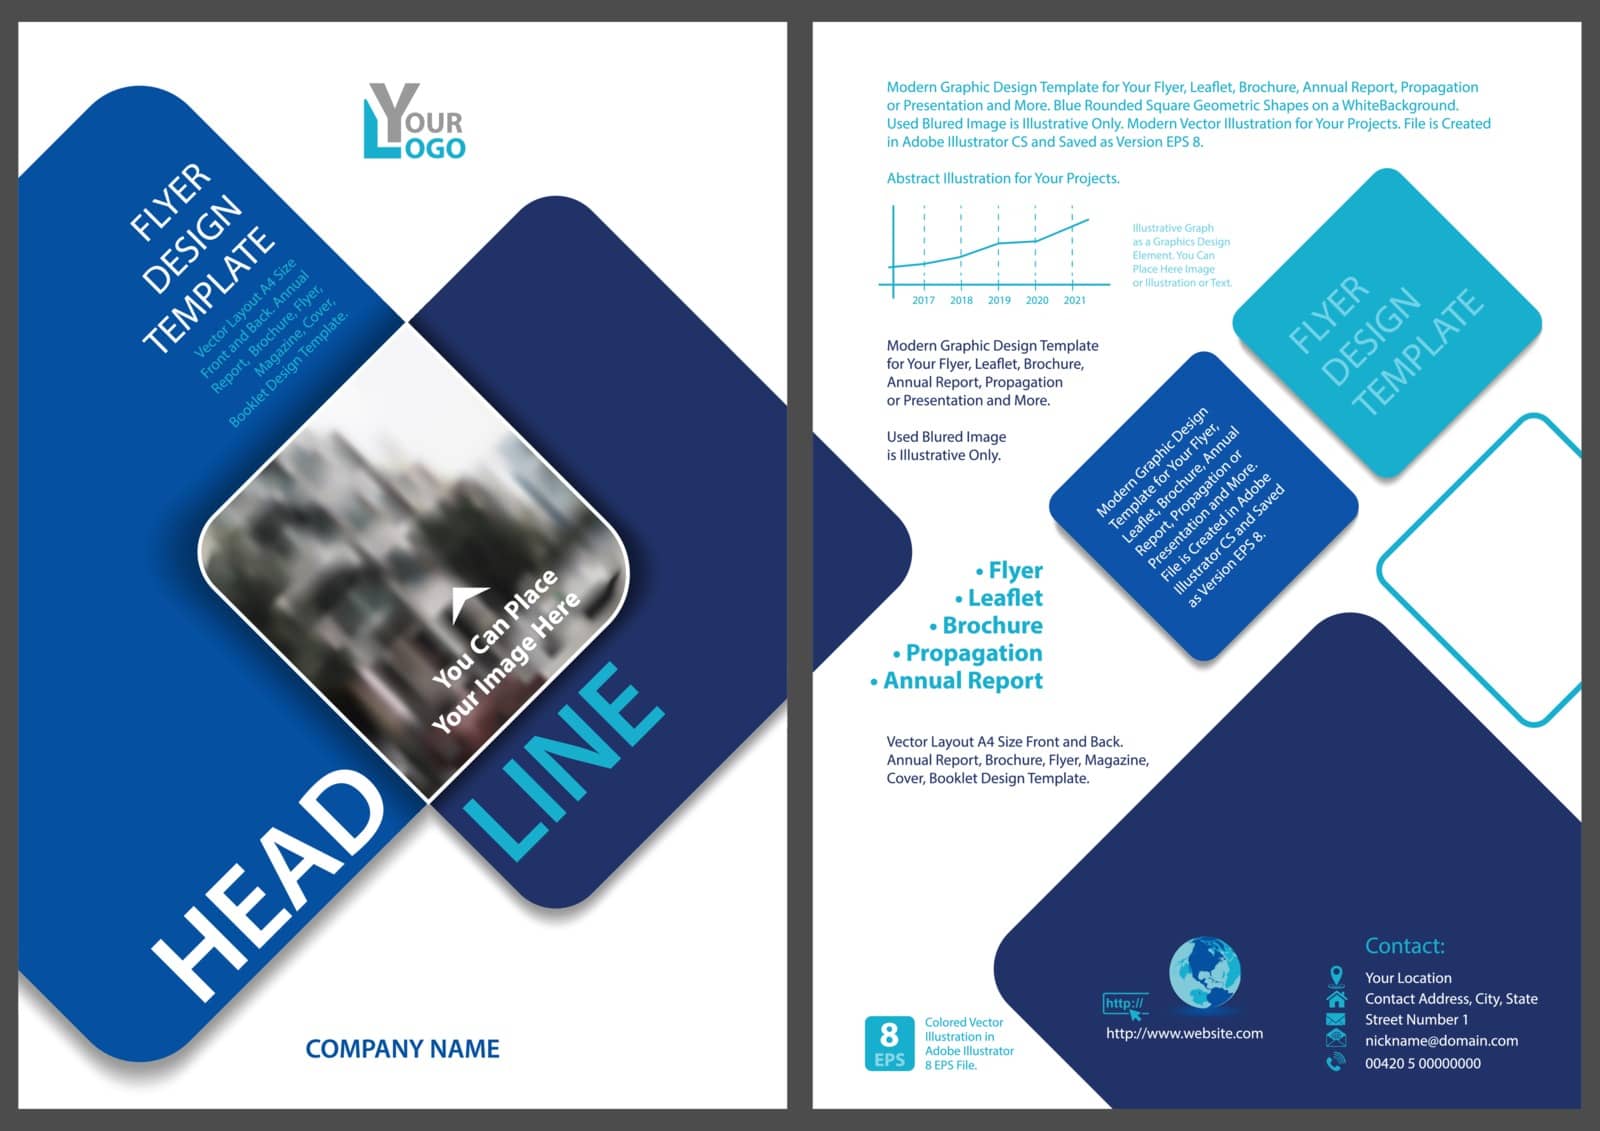 Flyer Template with Blue Rounded Squares by illustratorCZ